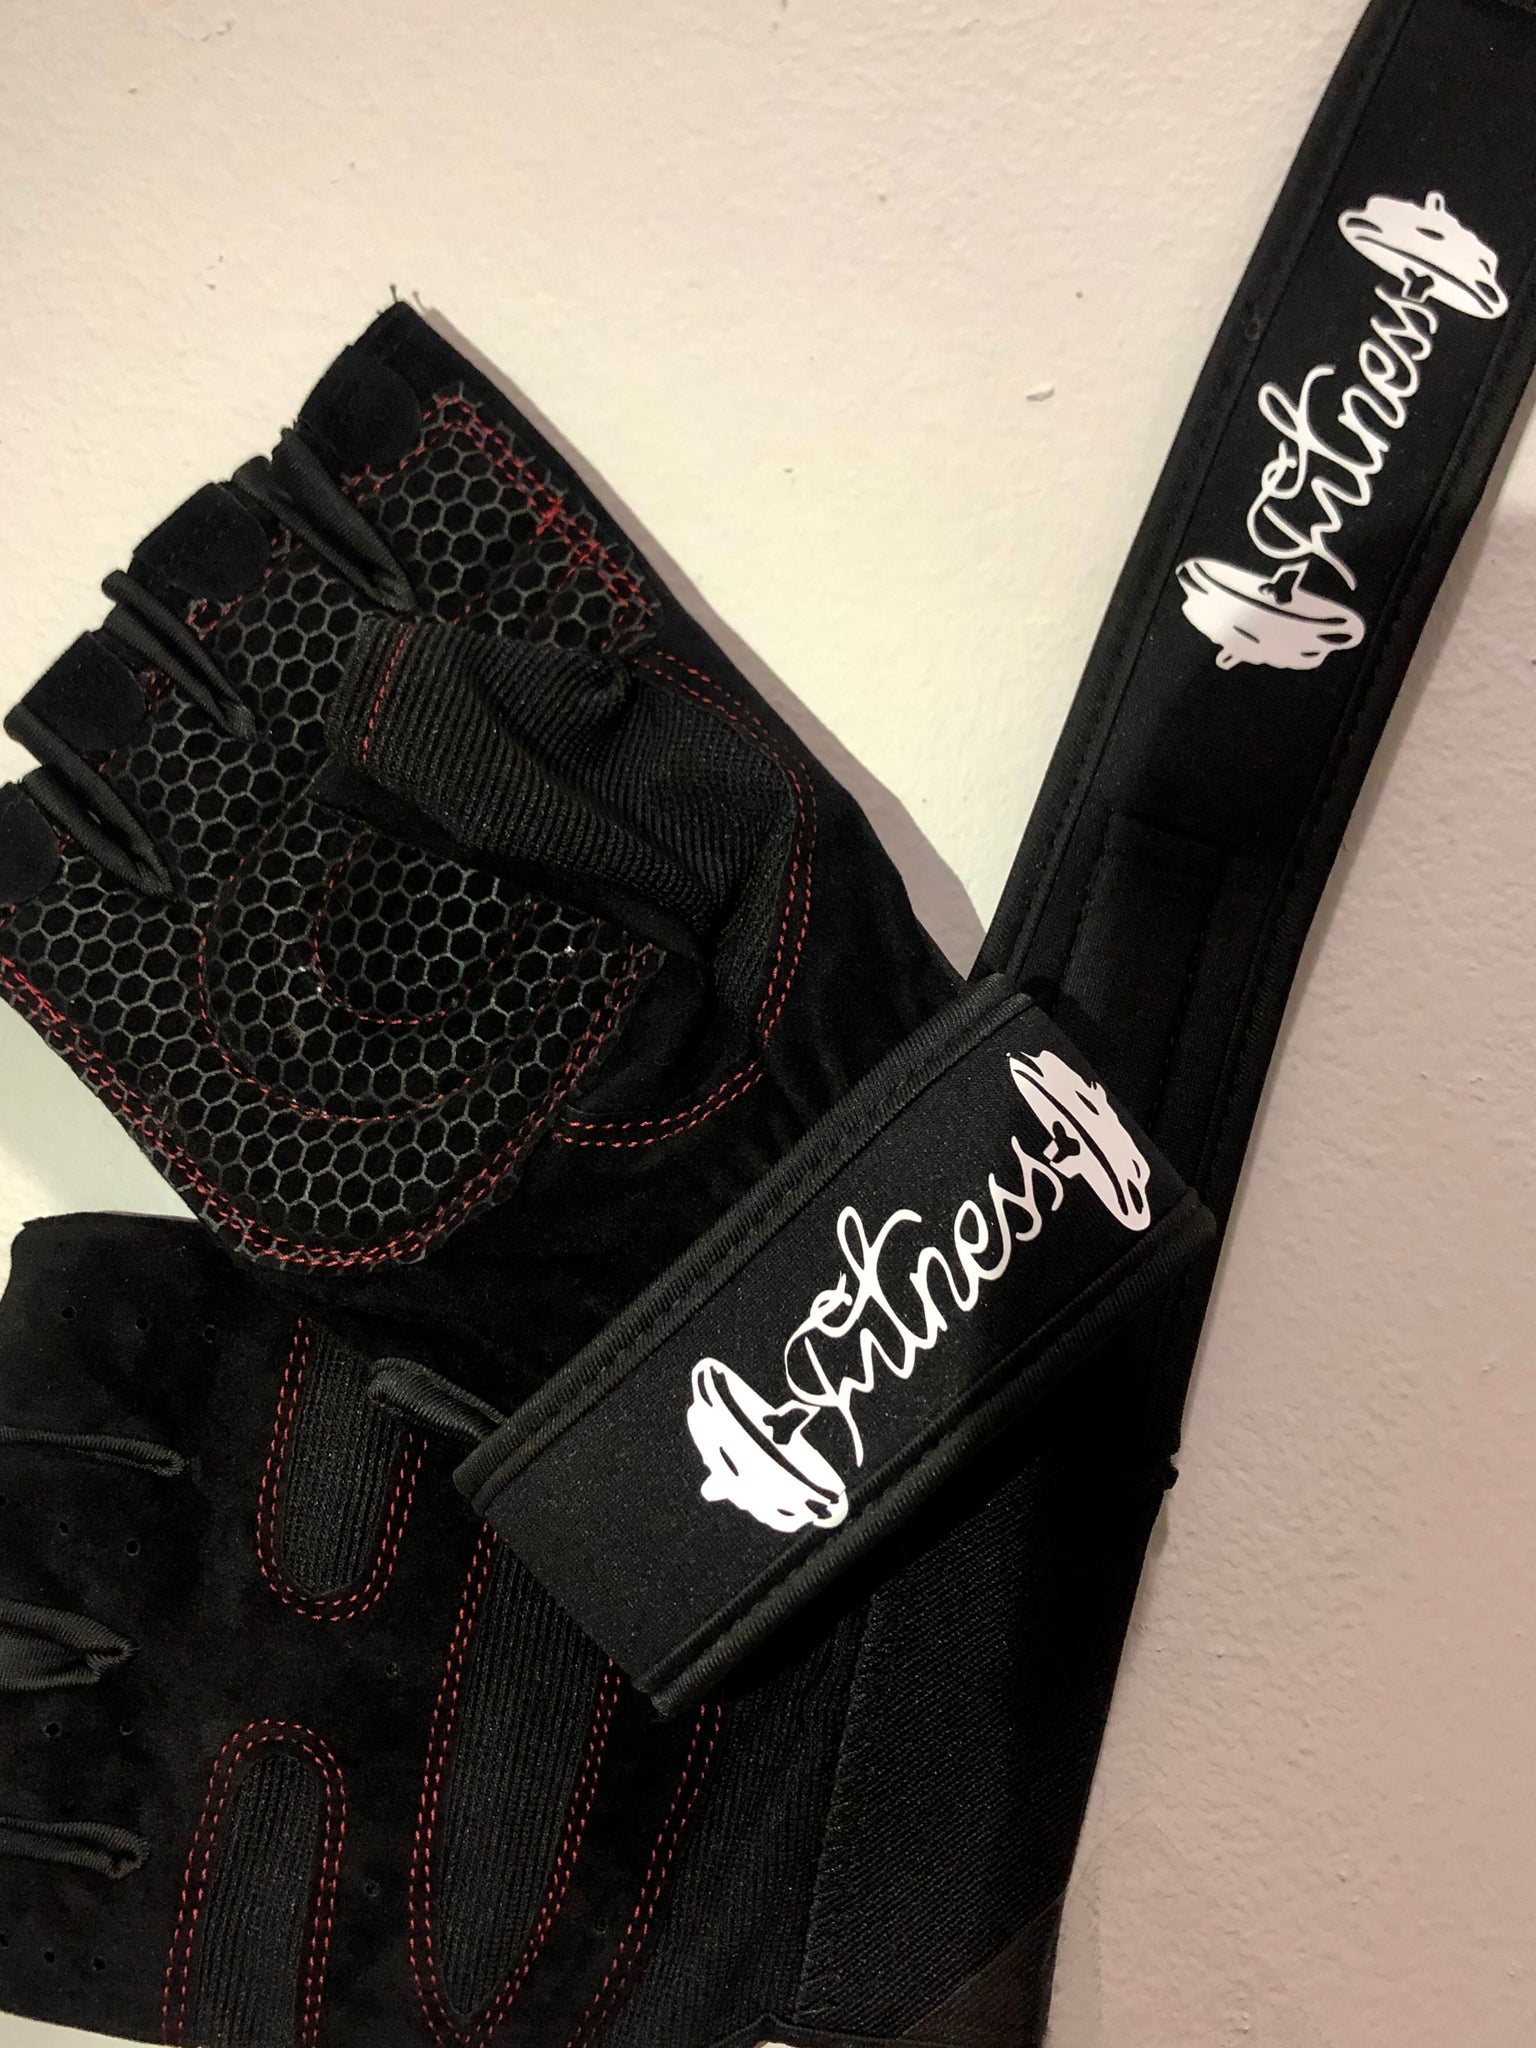  Mighty Grip Pole Dancing Gloves